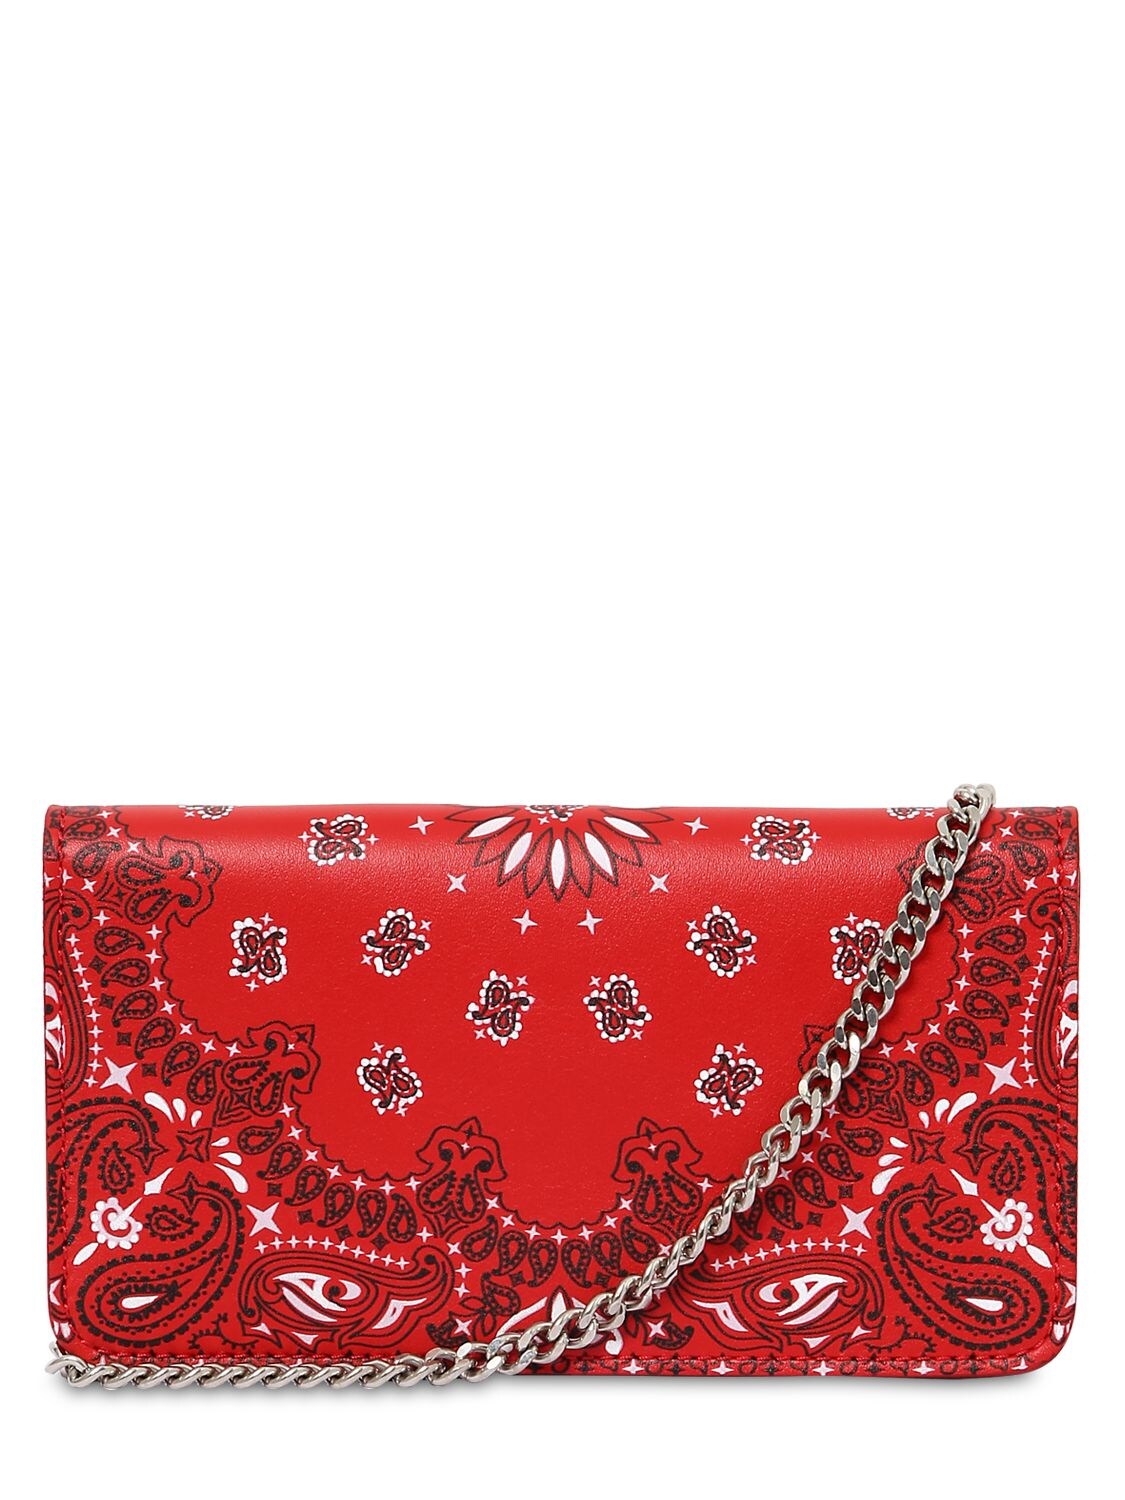 Htc Los Angeles Bandana Print Leather Wallet In Red